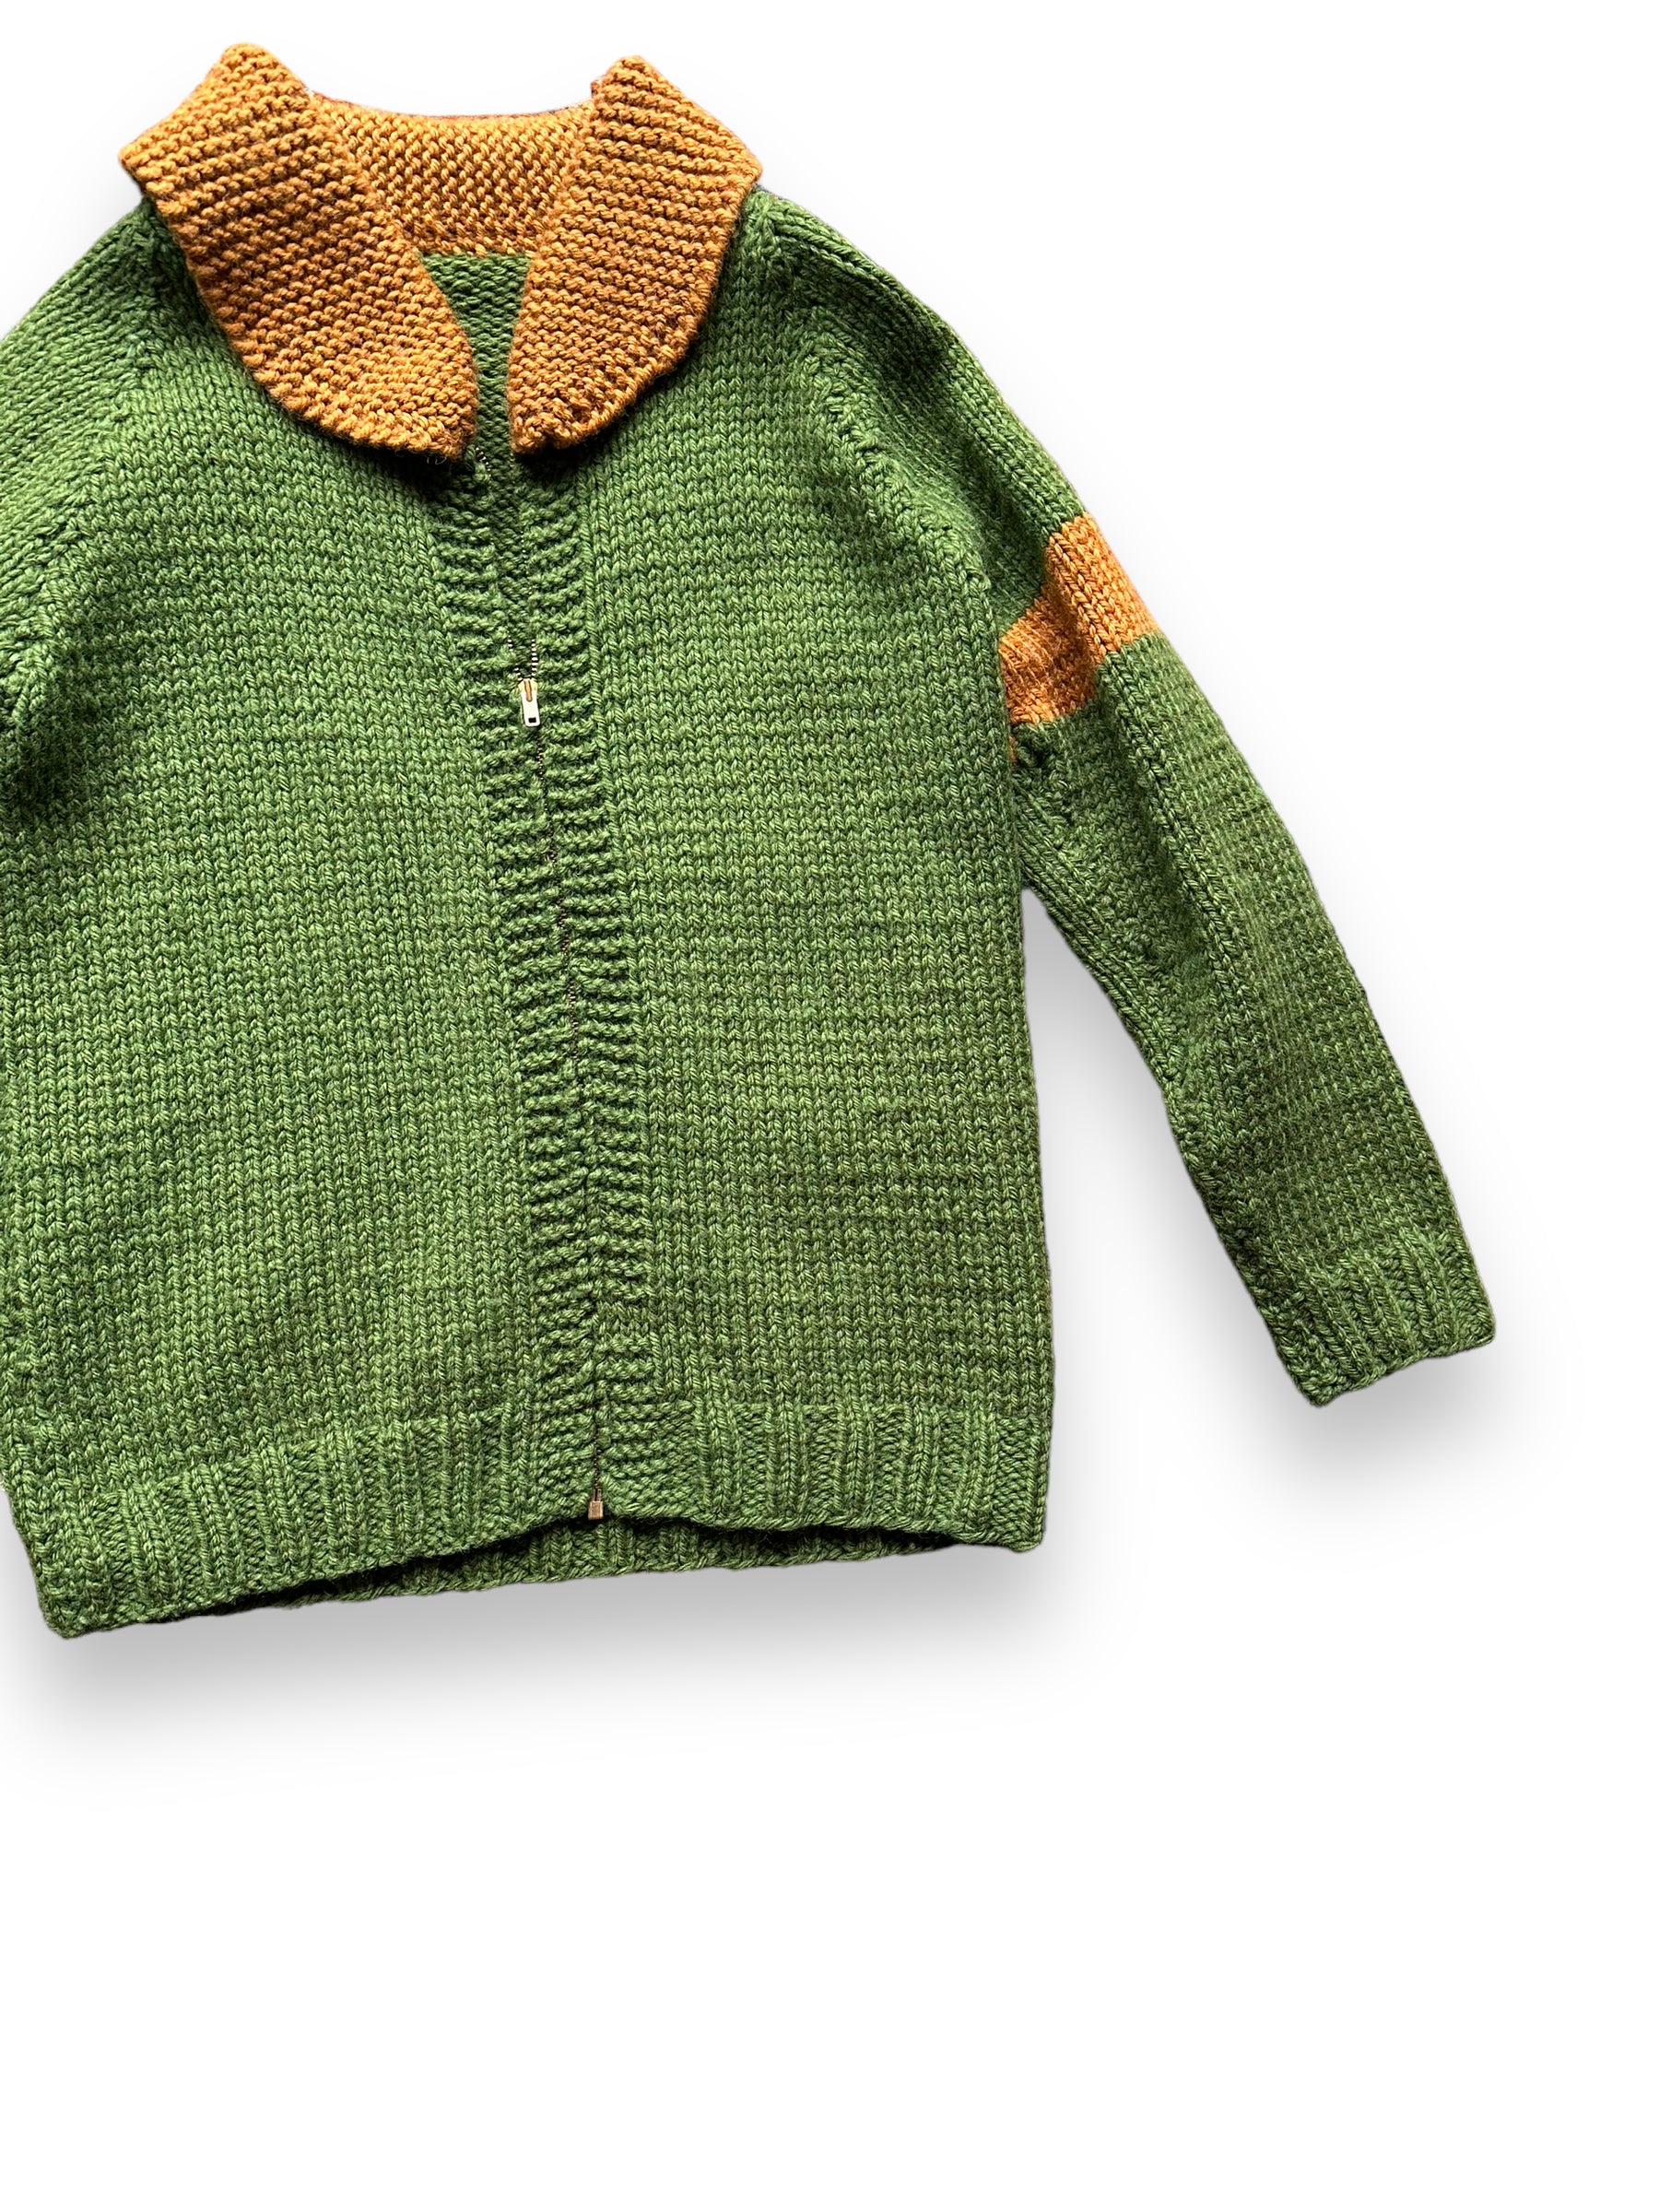 Front Left View of Vintage Green and Brown Striped Handknit Sweater SZ L | Vintage Wool Sweaters Seattle | Barn Owl Vintage Seattle